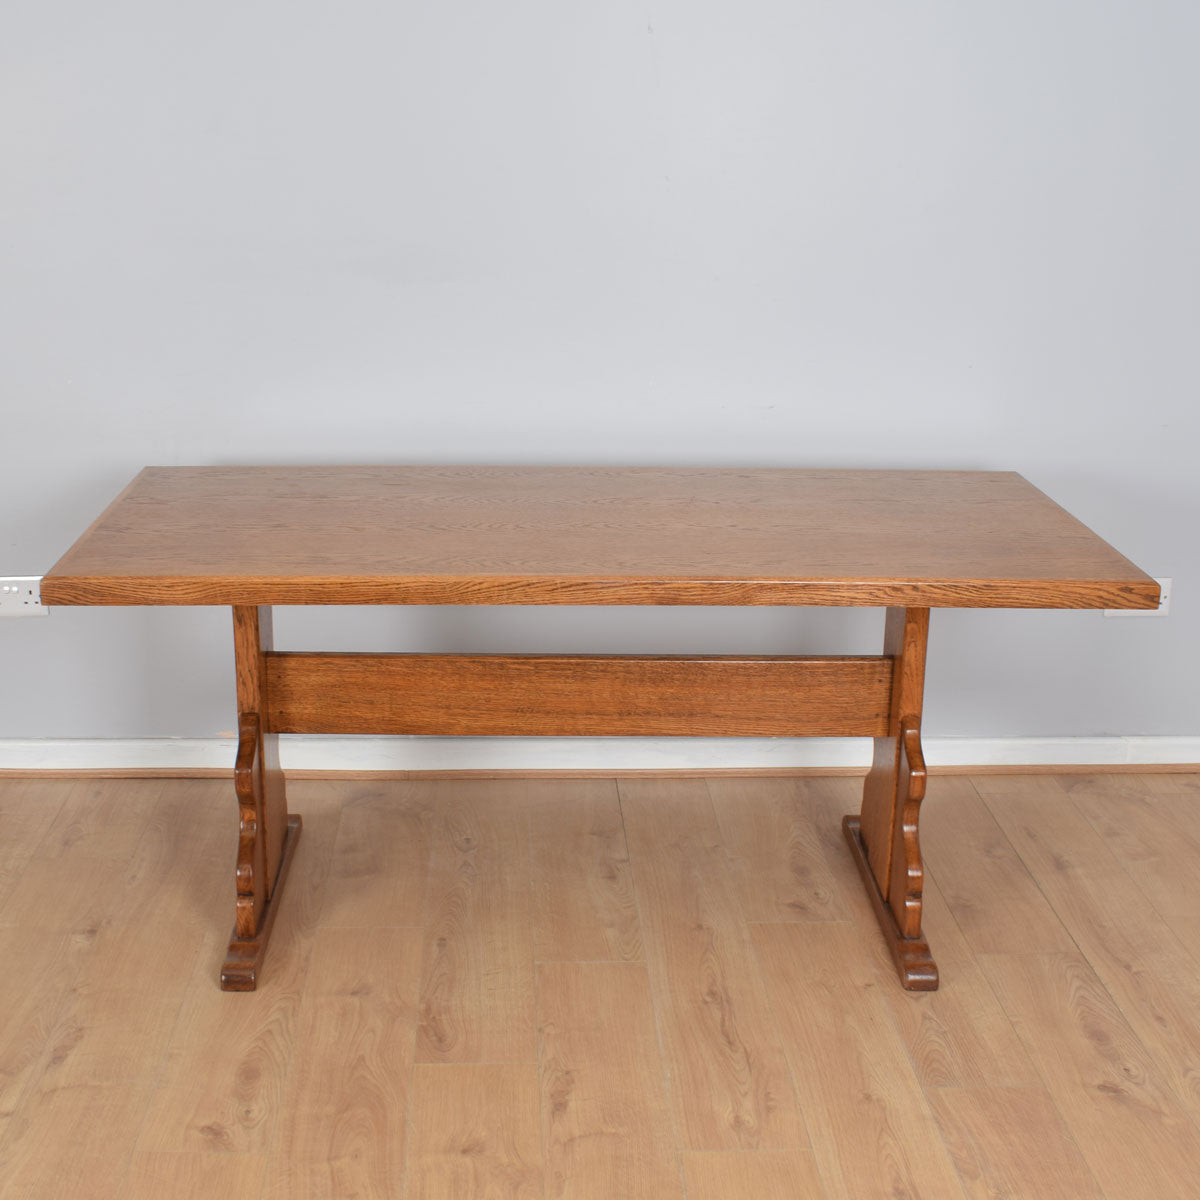 Solid Oak Table And Six Chairs